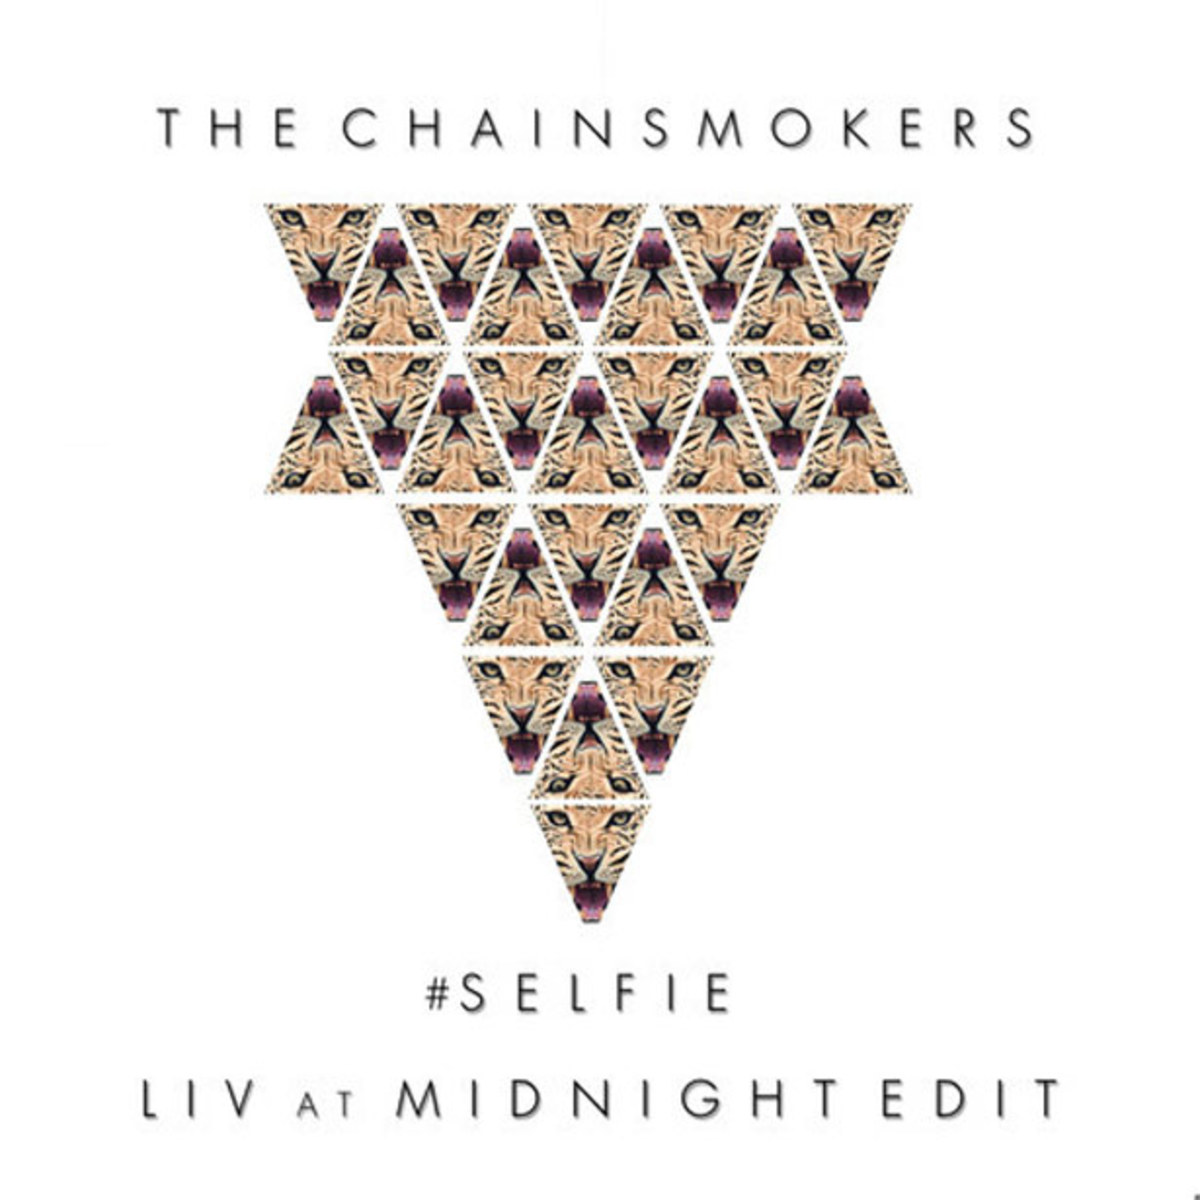 The Chainsmokers Share A "#Selfie" As An EDM Download In Honor Of Their 11/22 Show At LIV Miami